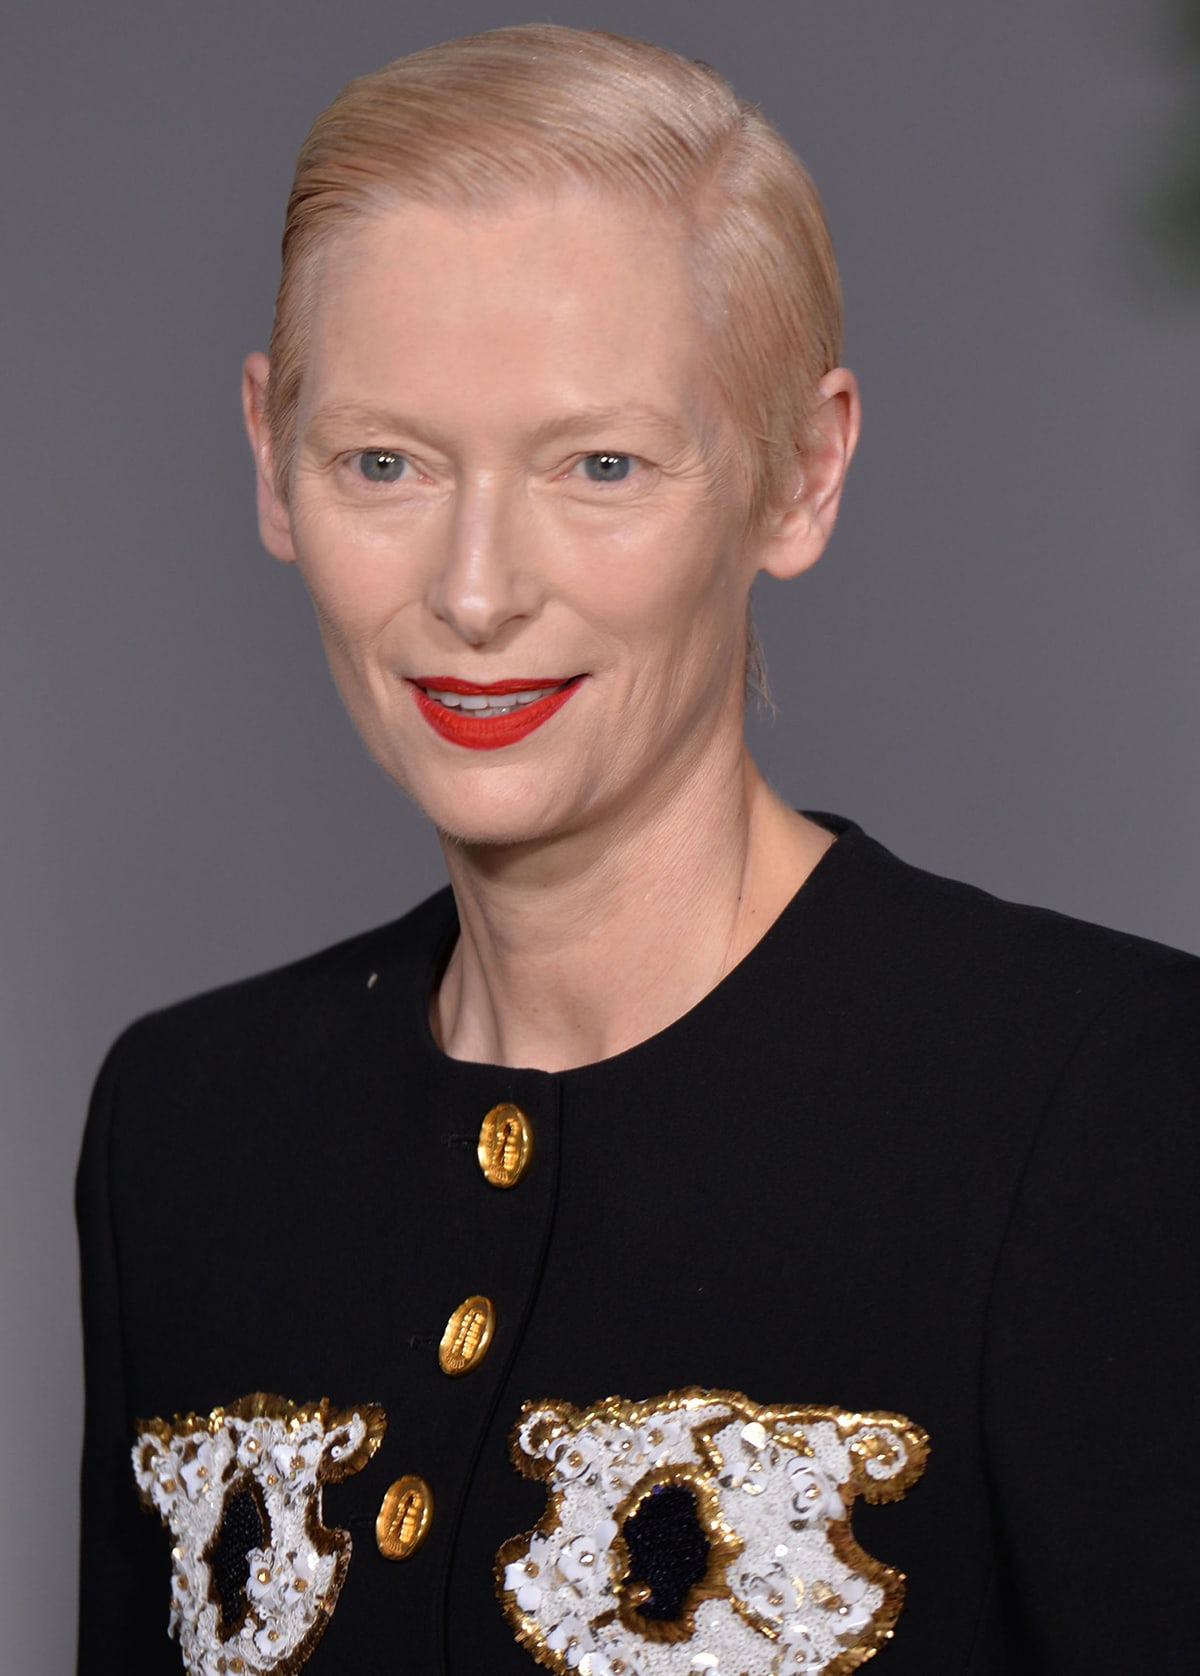 Tilda Swinton wears her signature short hairstyle and adds a pop of color to the look with bright red lipstick